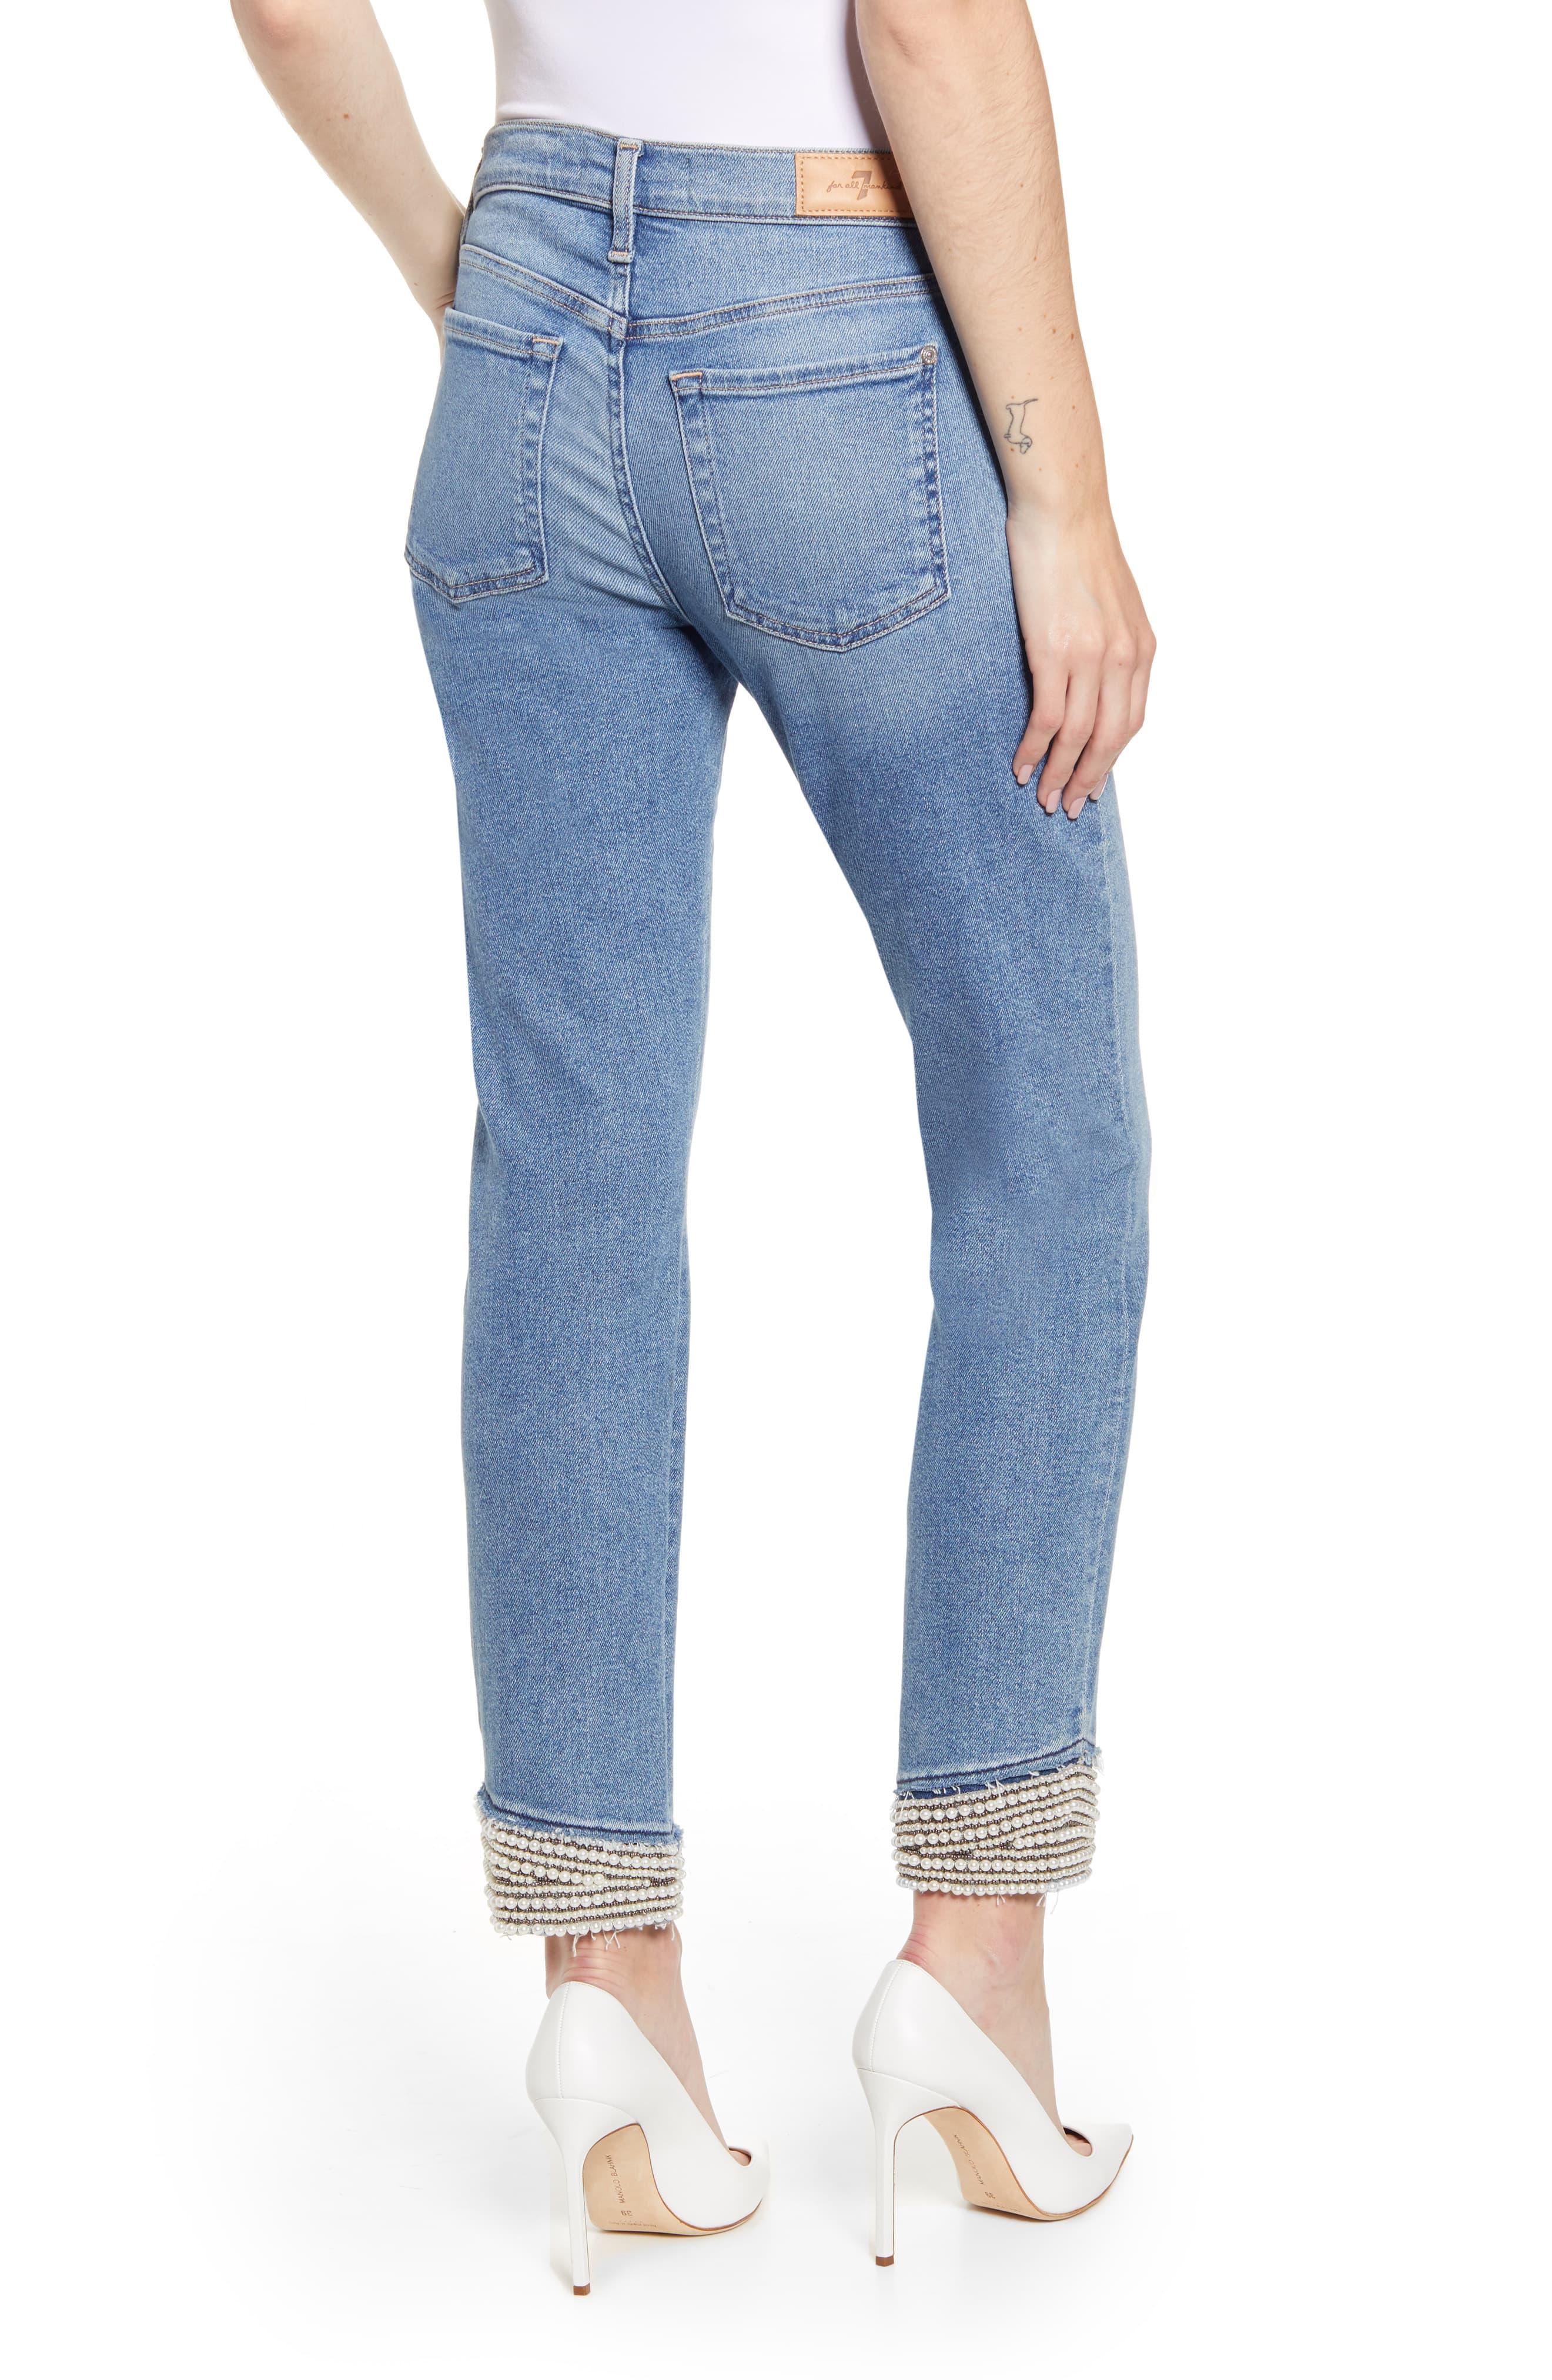 7 for all mankind pearl jeans